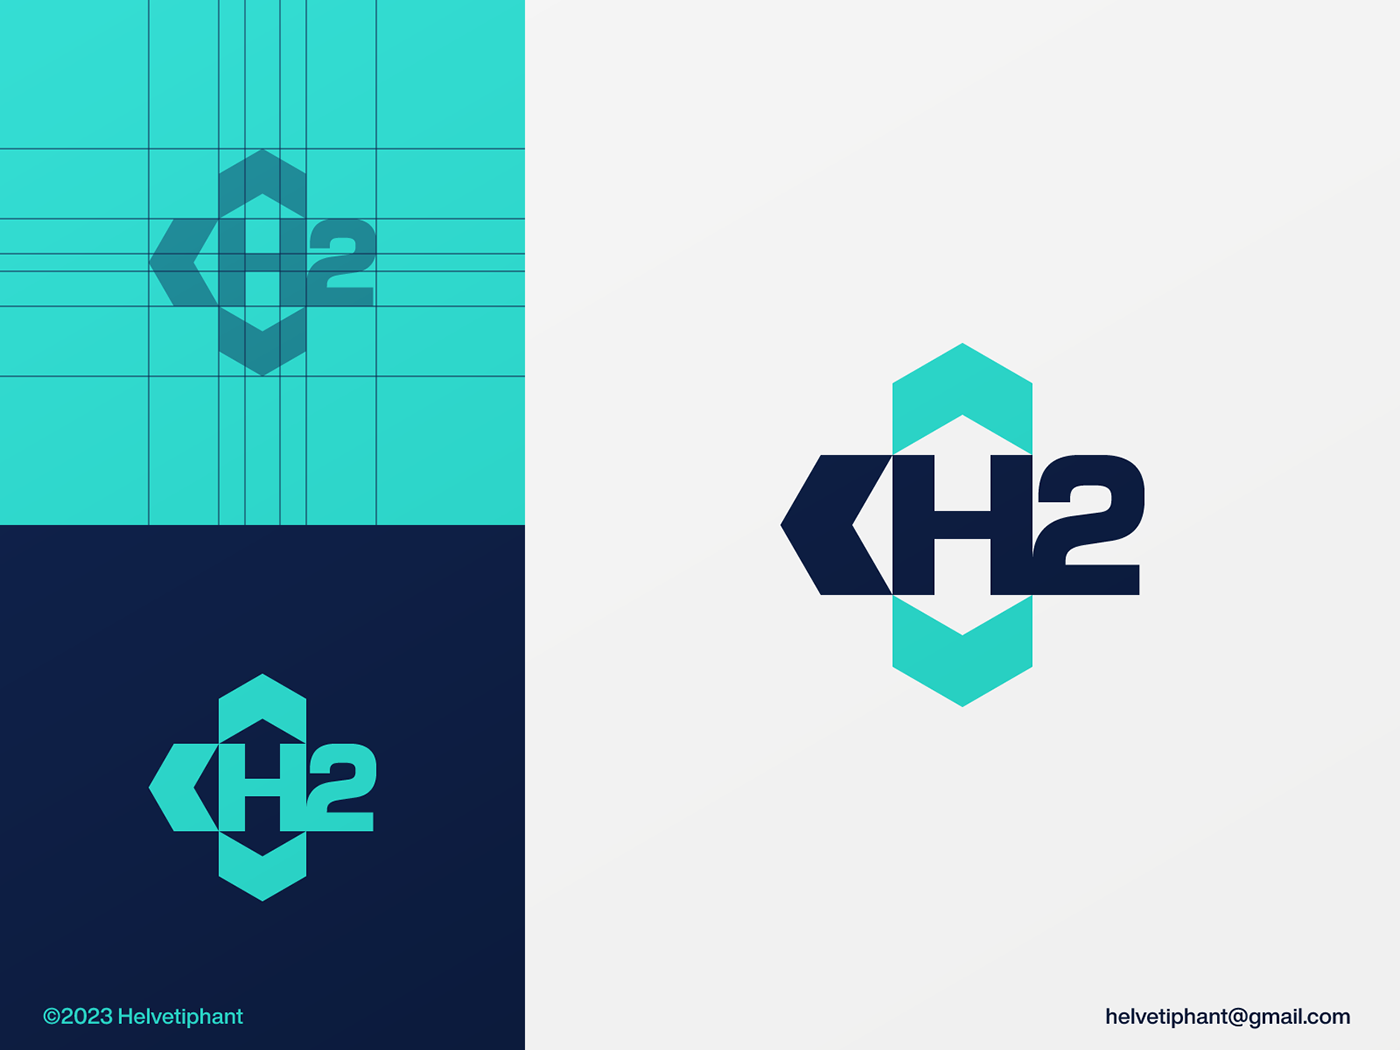 Hydrogen H2 logo design concept with arrows in the negative space